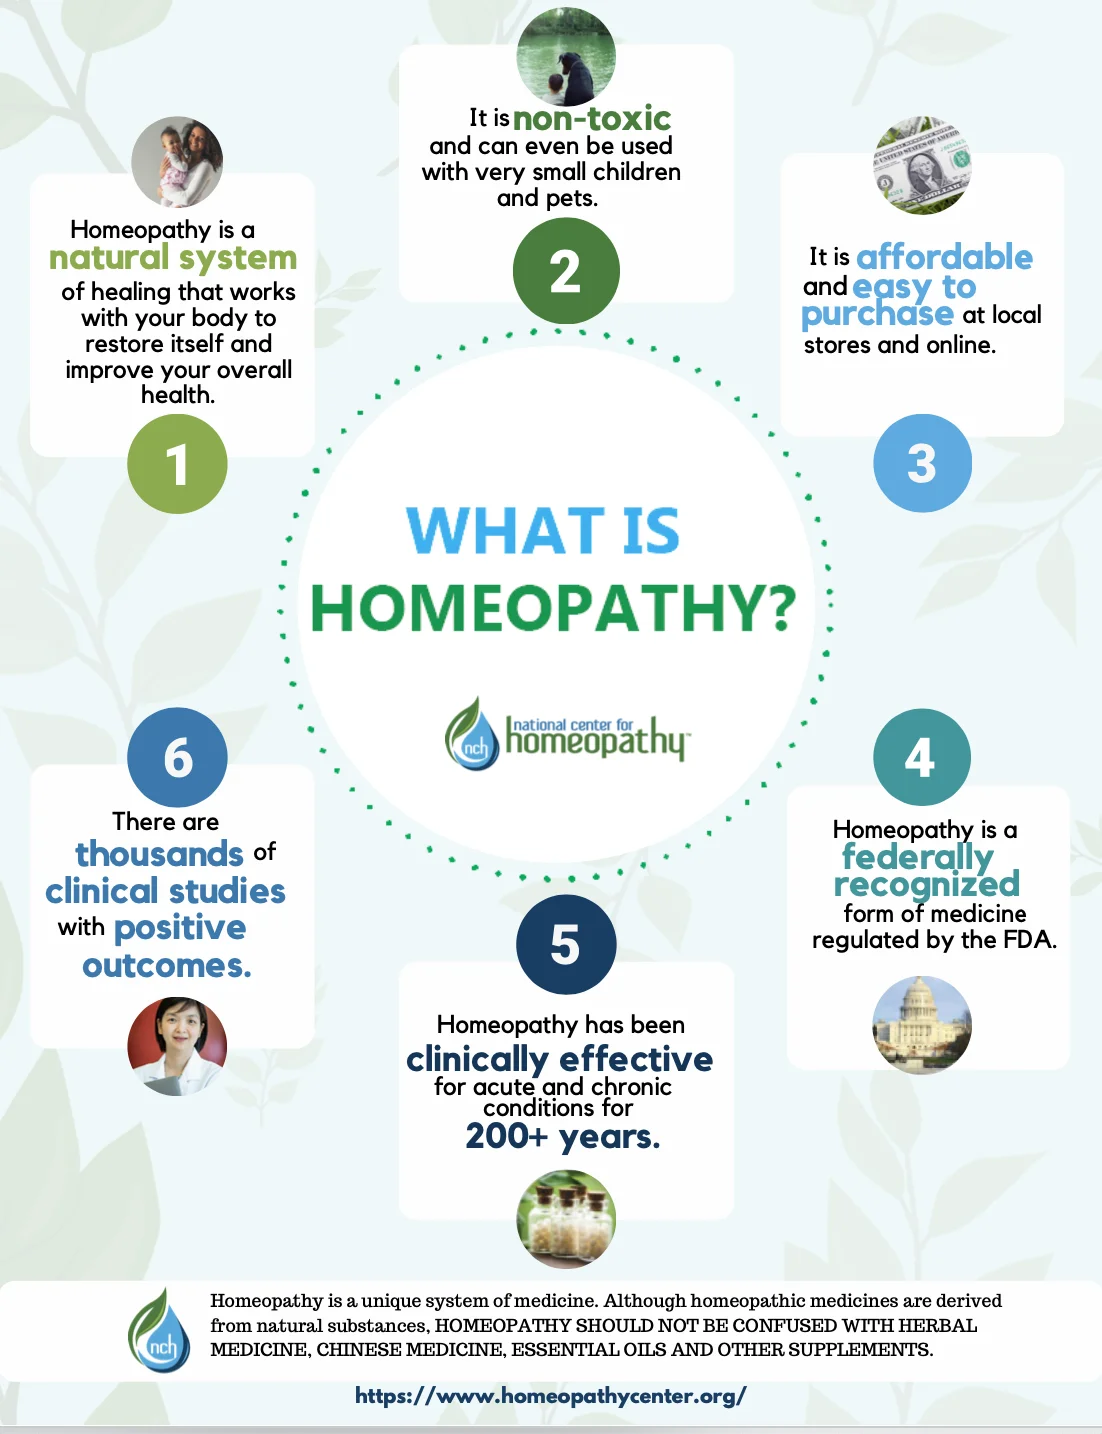 What is homeopathy